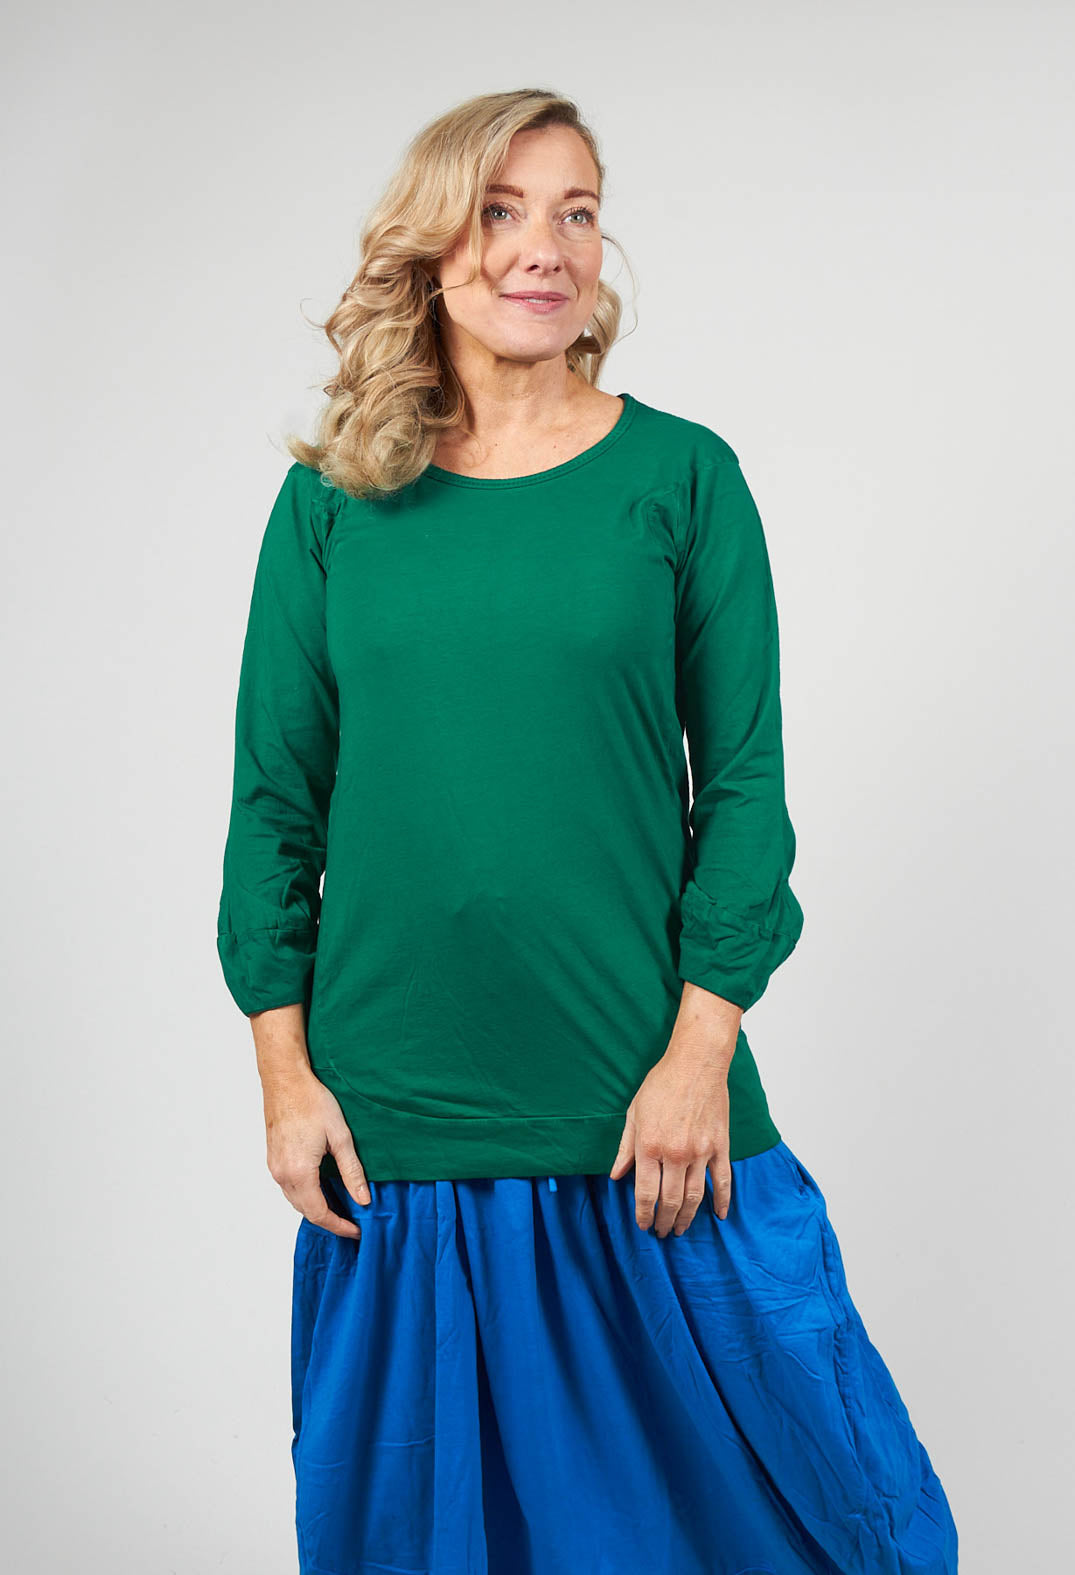 lady wearing a round neck long sleeved t shirt in green with bell sleeves